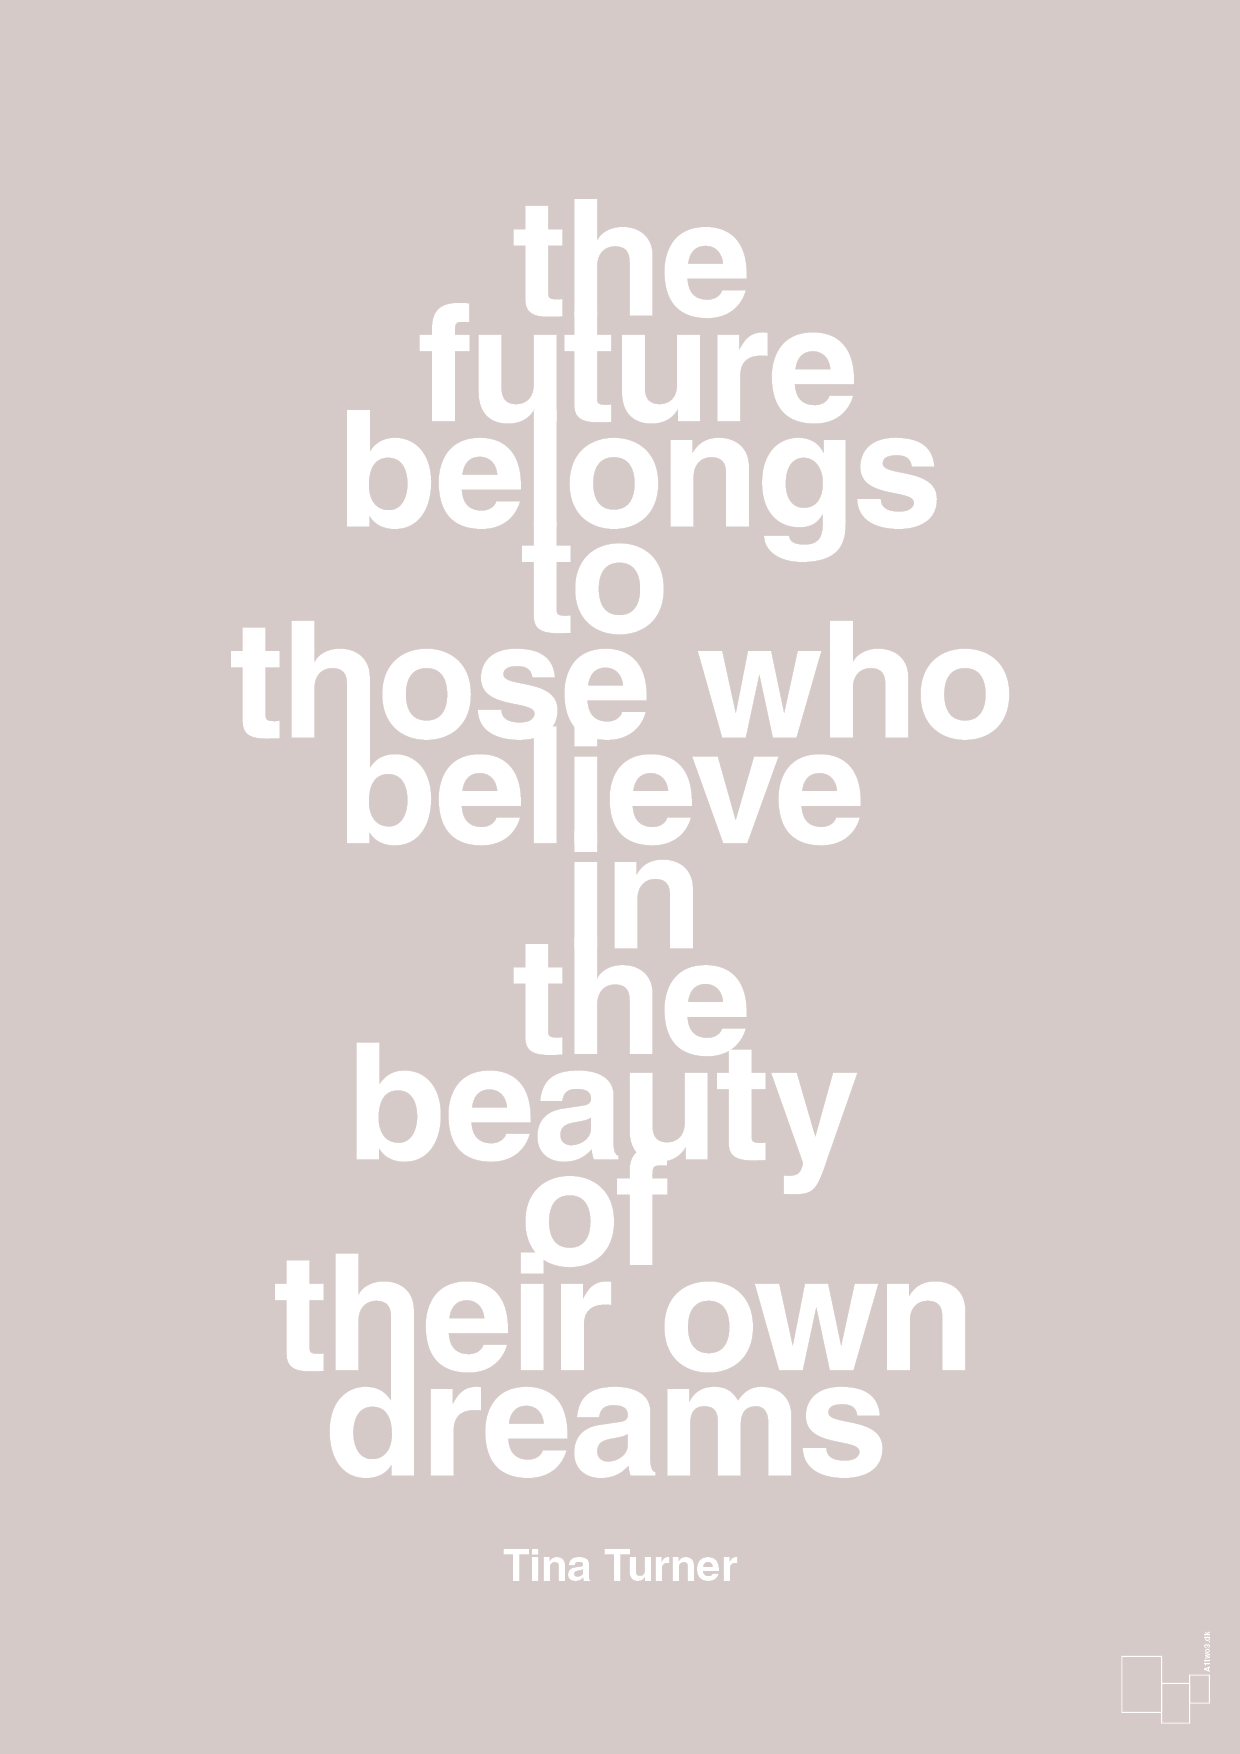 the future belongs to those who believe in the beauty of their own dreams - Plakat med Citater i Broken Beige